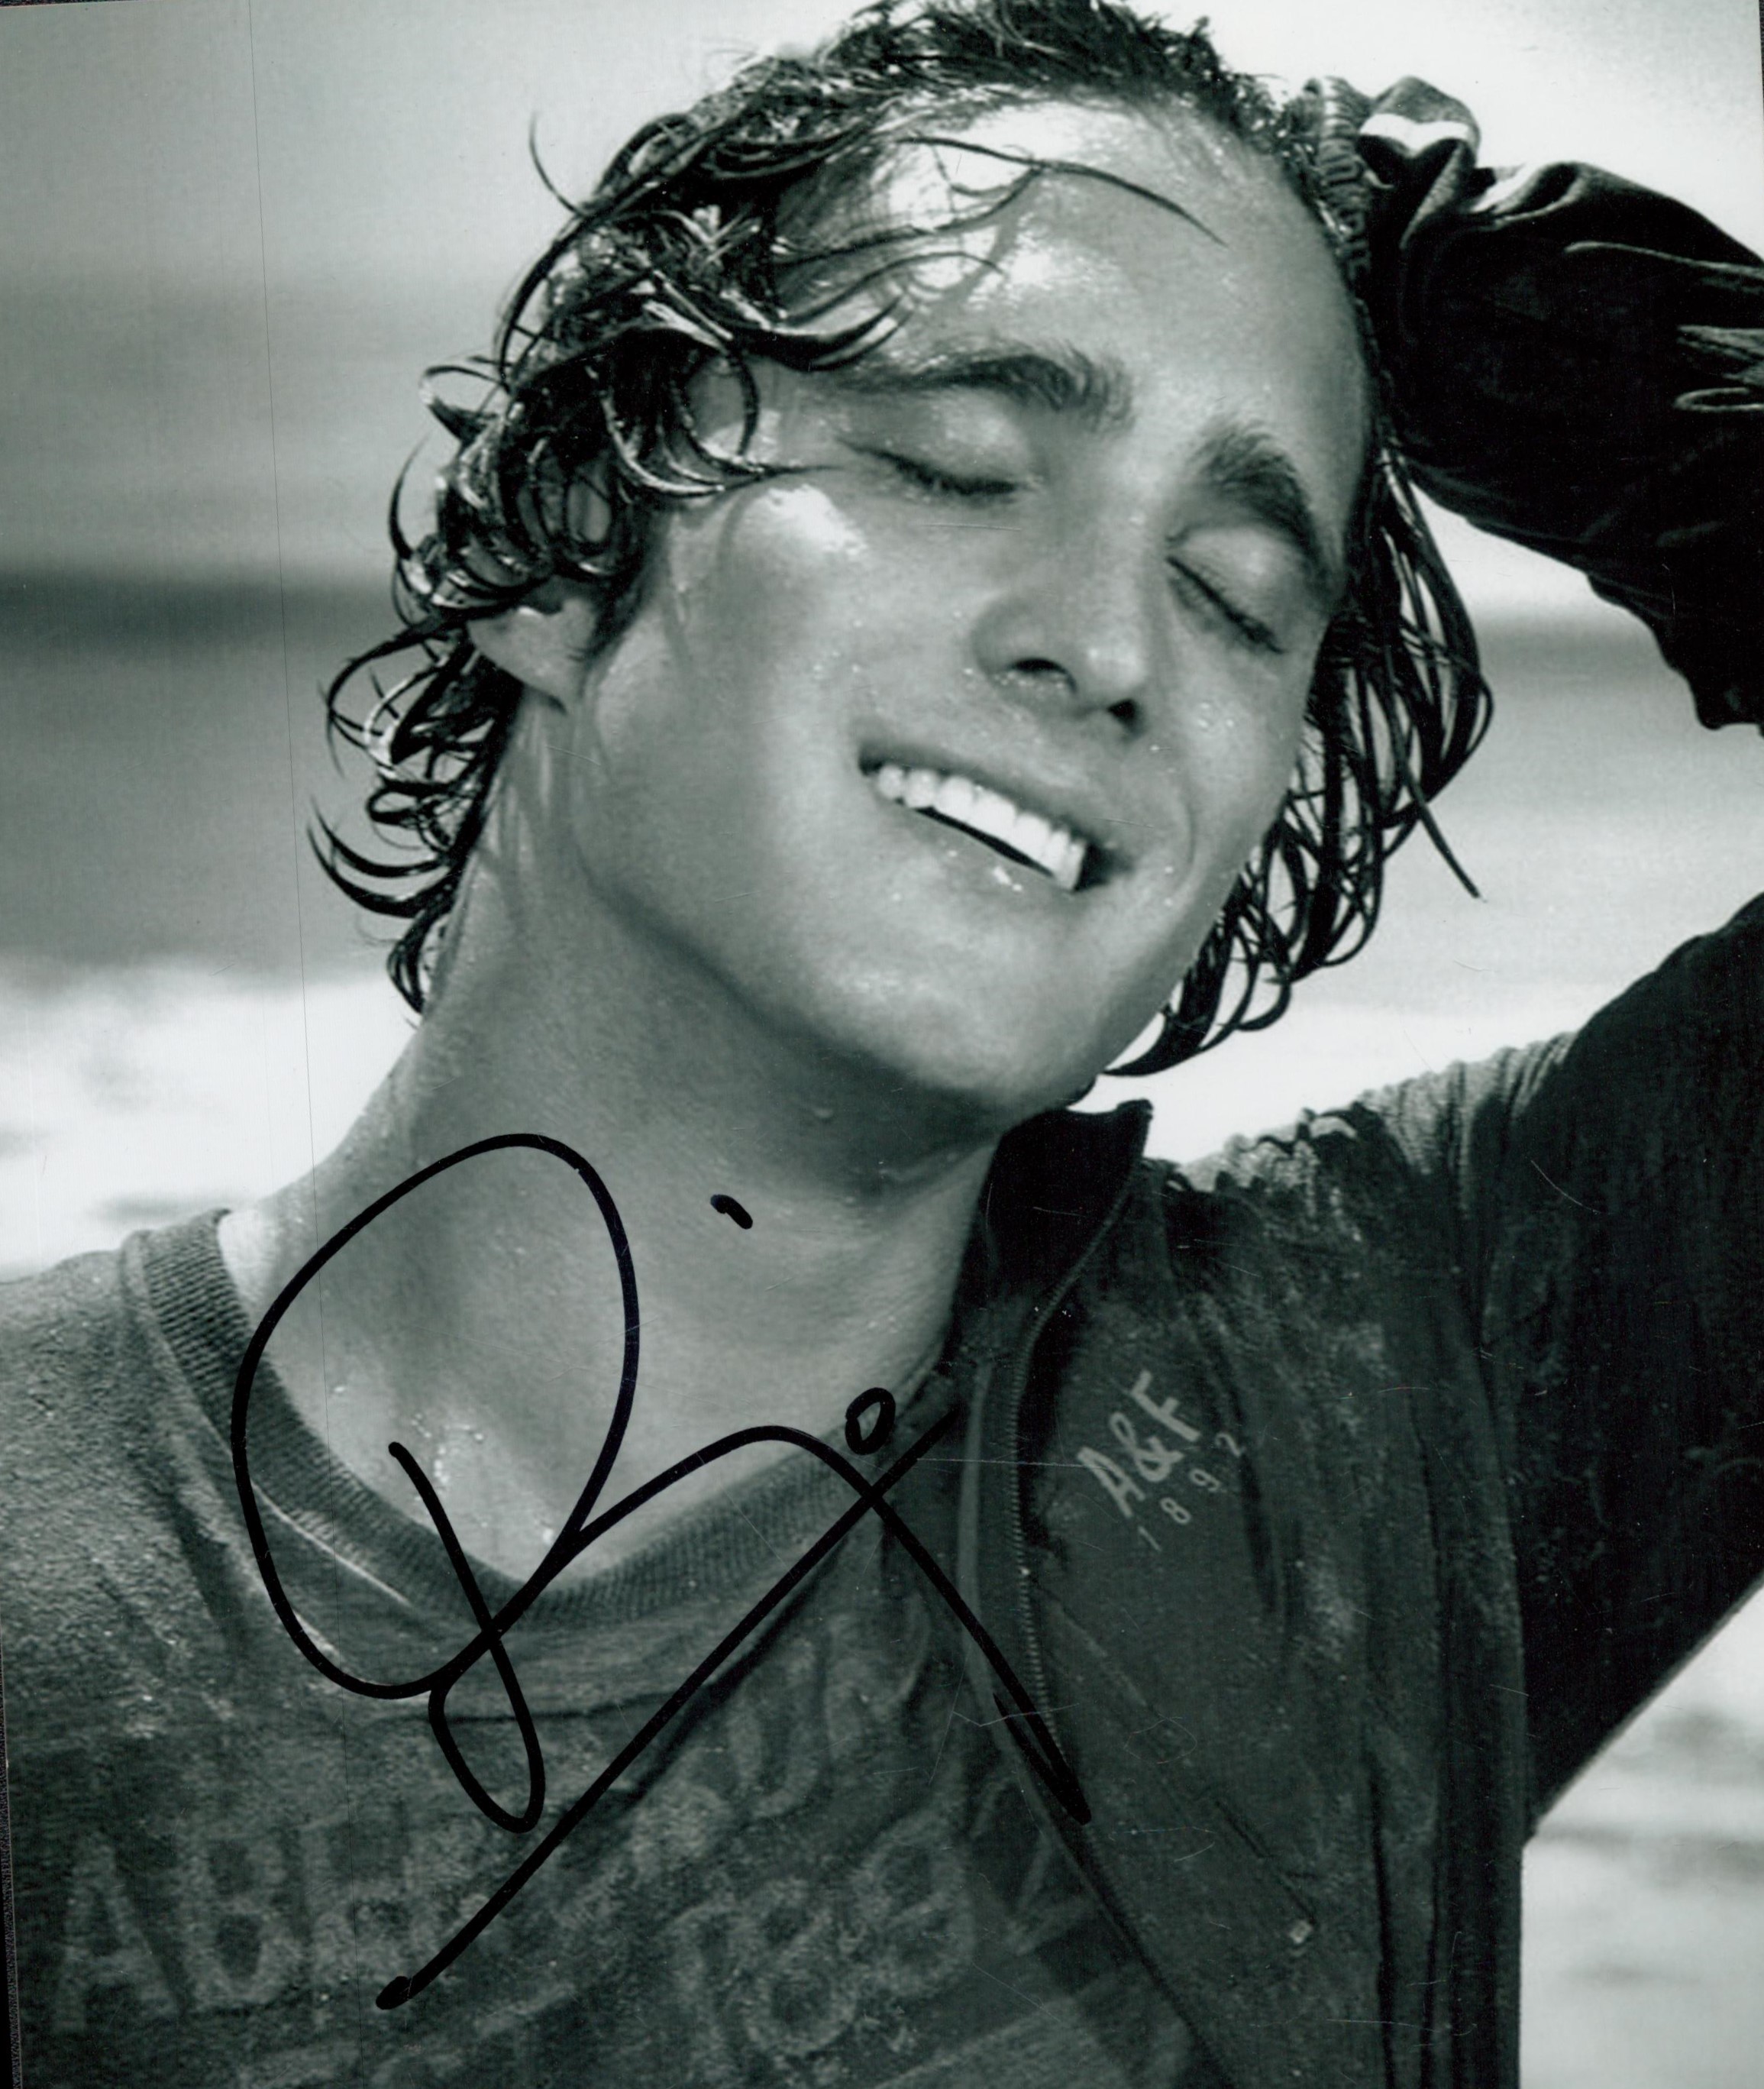 Diego Boneta signed 10x8 inch black and white photo. Good condition. All autographs are genuine hand